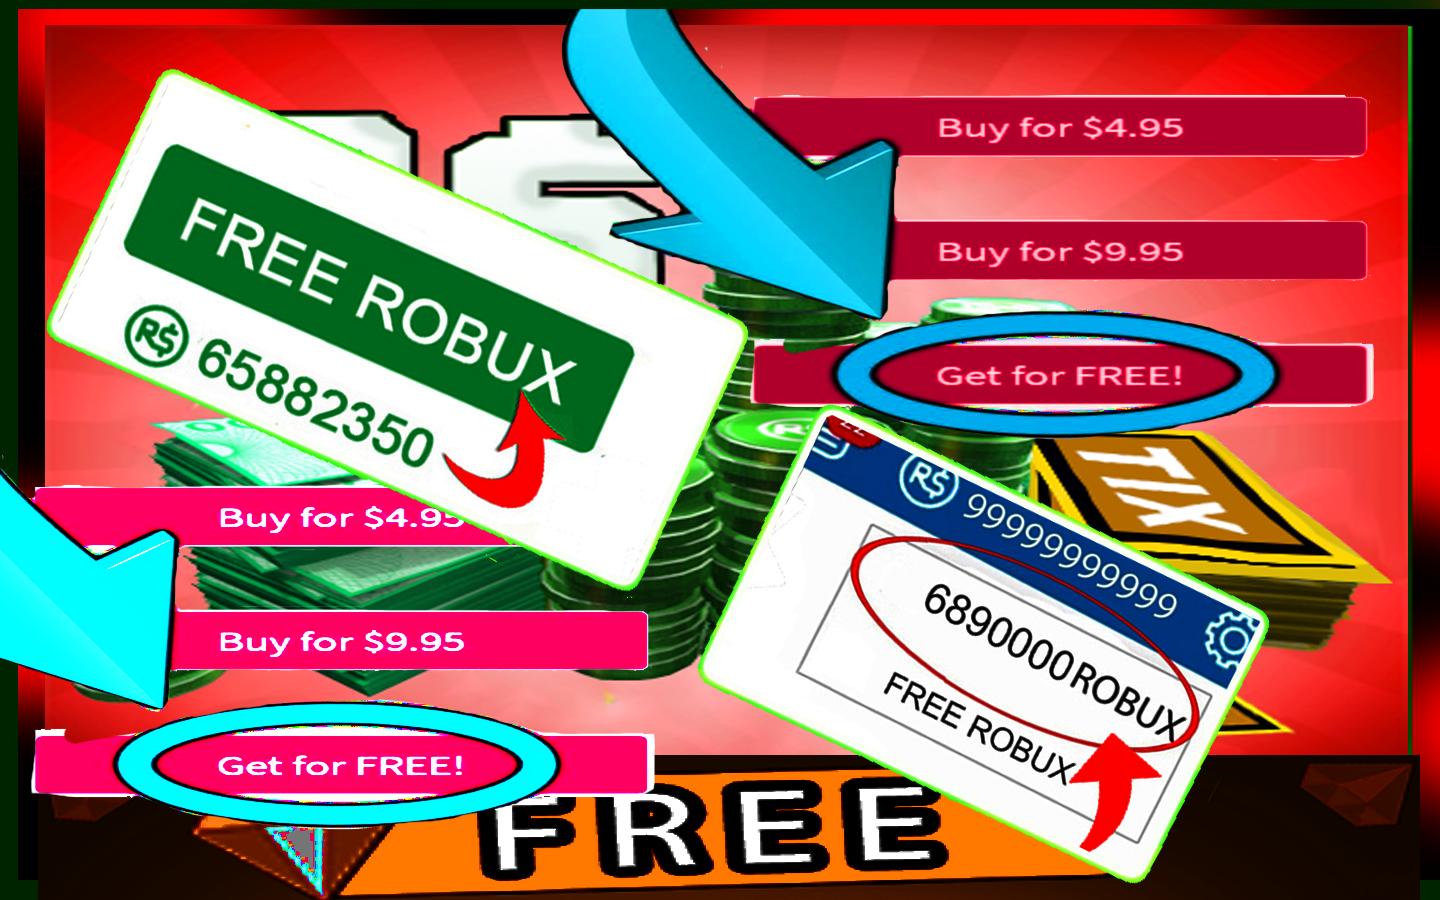 Guide Free Robux Counter Free Rbx 2020 Tips For Android Apk Download - free robux counter tips guide rbx free 2020 10 apk